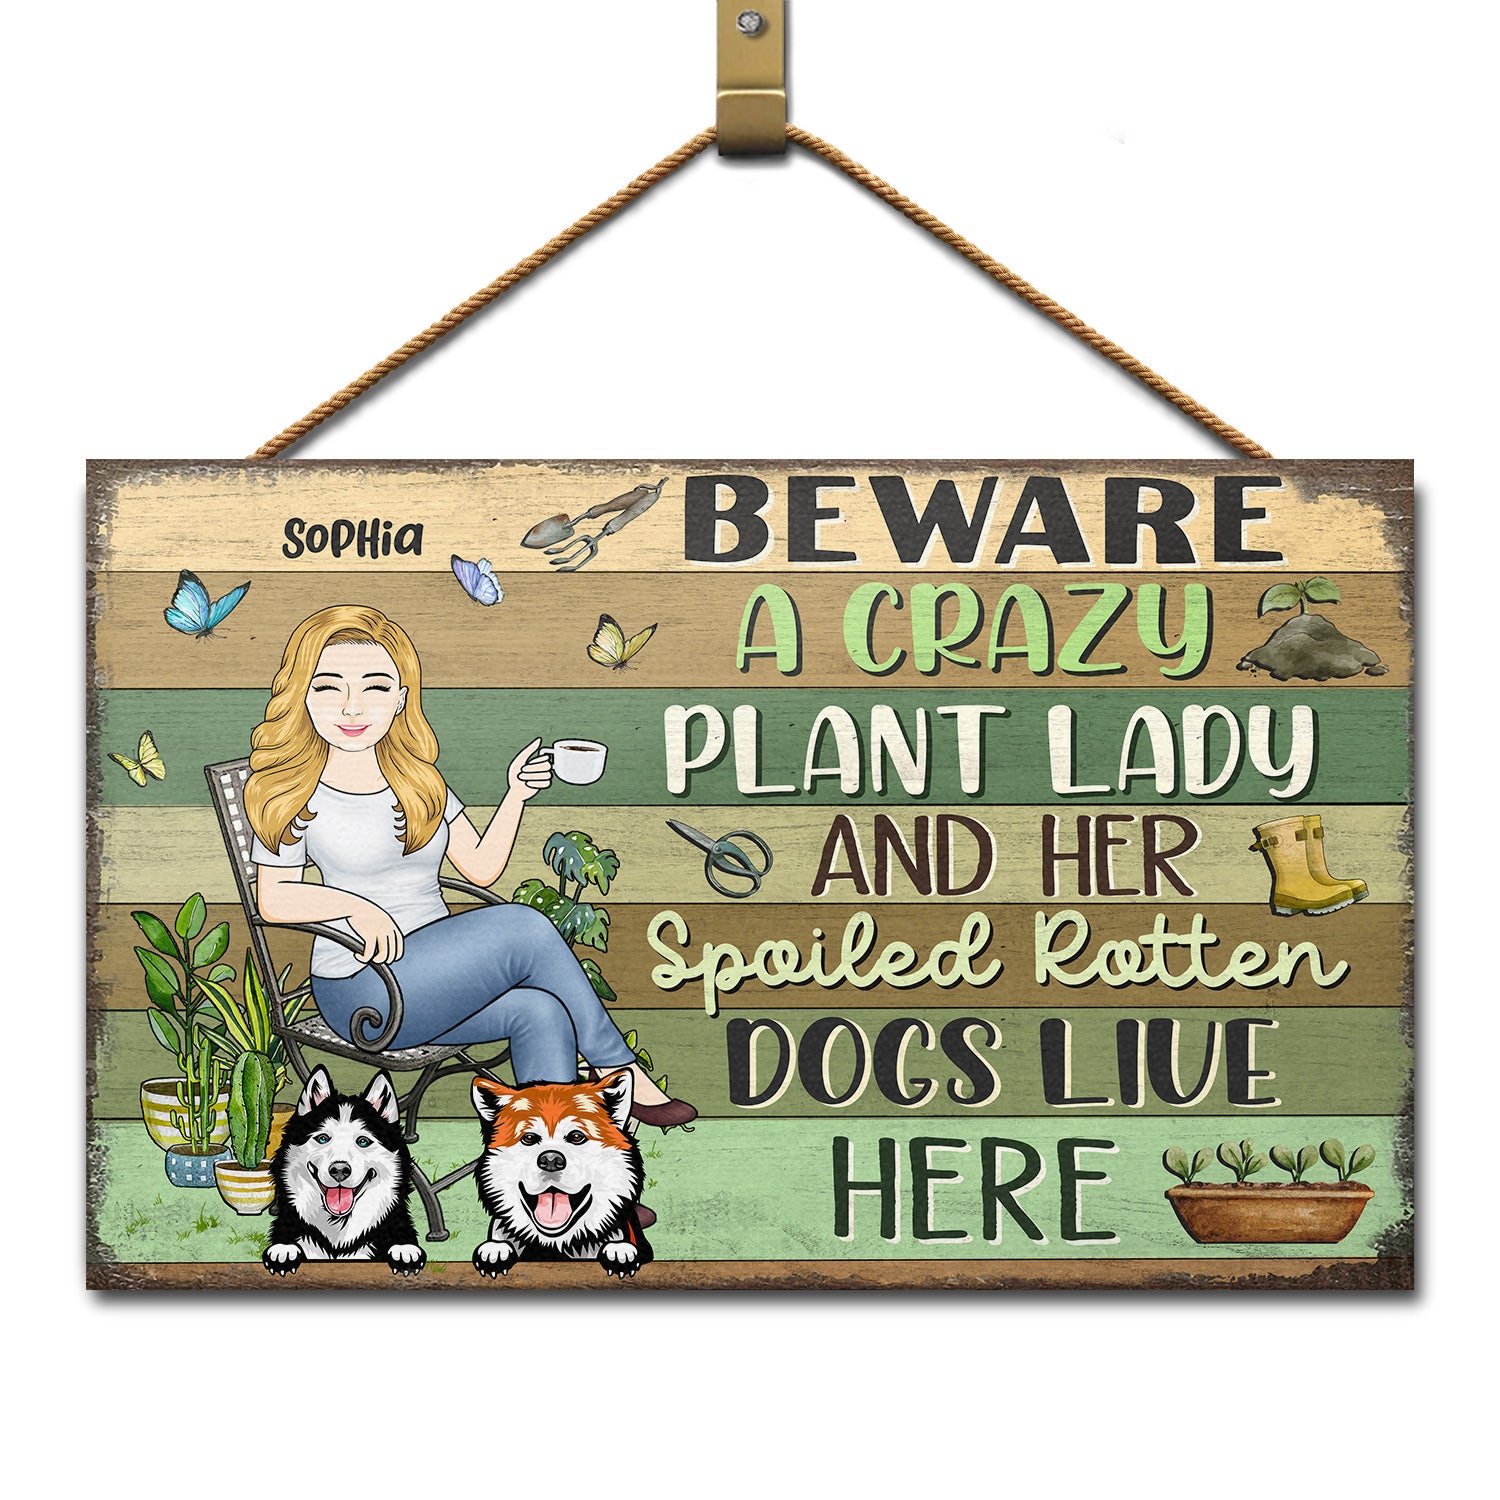 Beware A Crazy Plant Lady & Her Spoiled Rotten Dogs Live Here Gardening - Garden Sign, Birthday, Housewarming Gift For Her, Him, Gardener, Outdoor Decor - Personalized Custom Wood Rectangle Sign